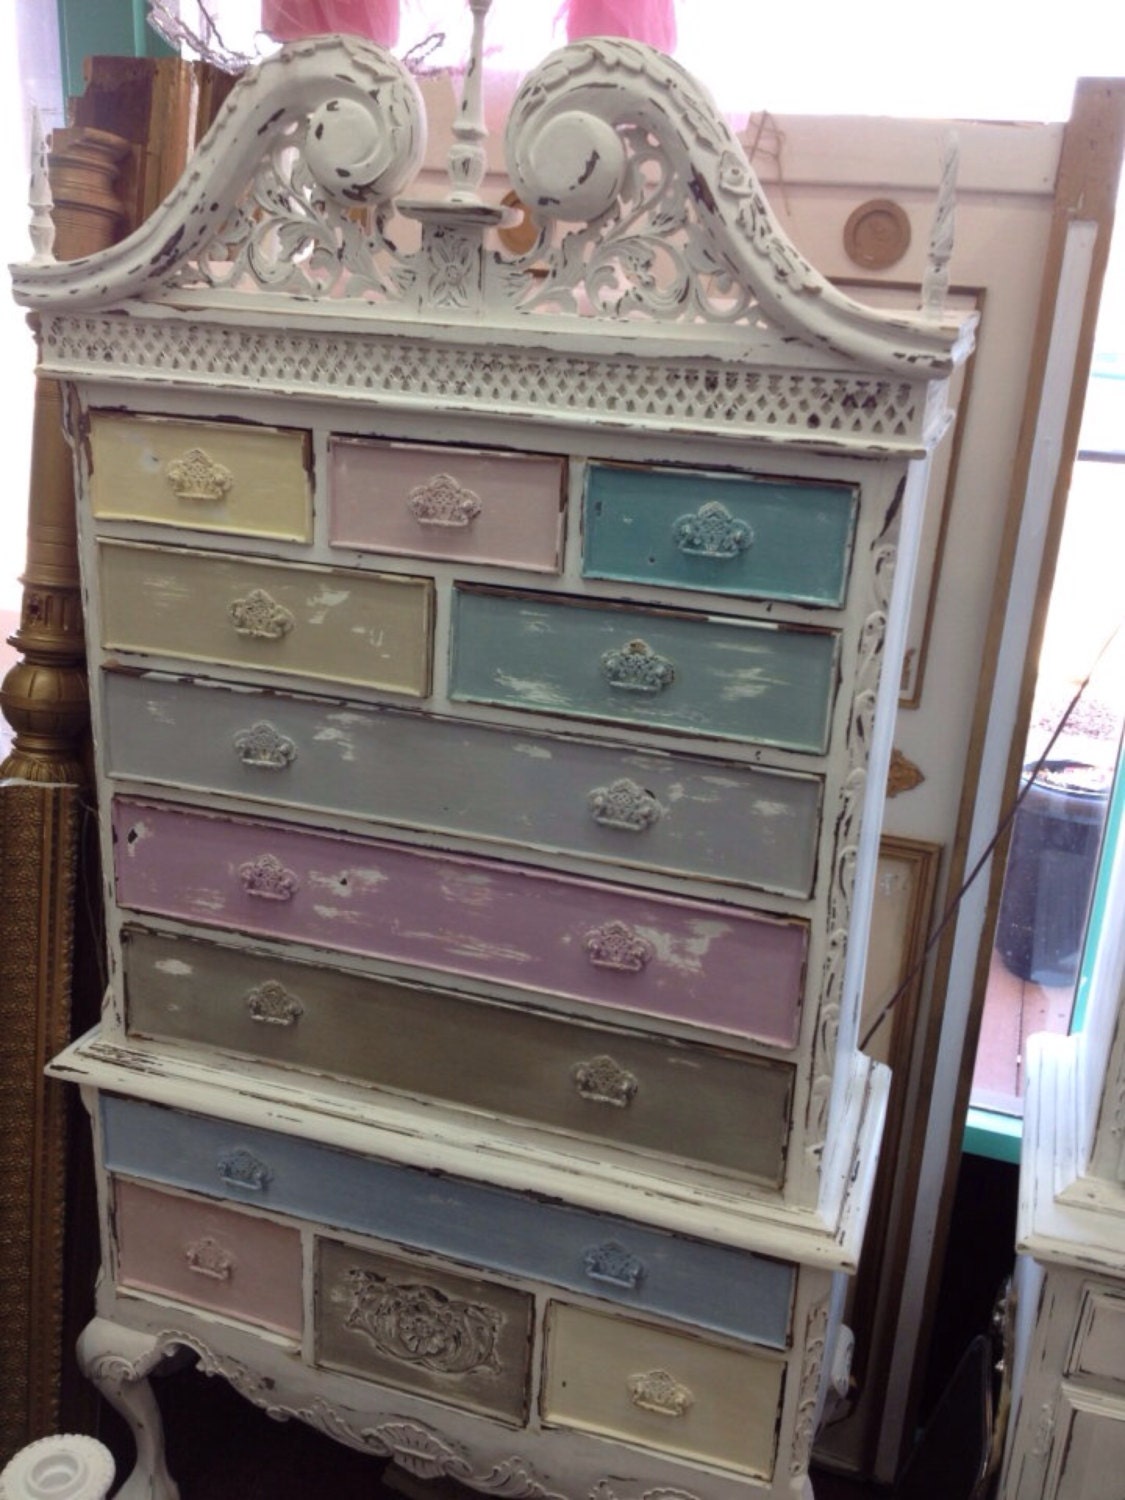 Vintage Inspired Shabby Chic Multi-Colored Queen Anne Cabinet